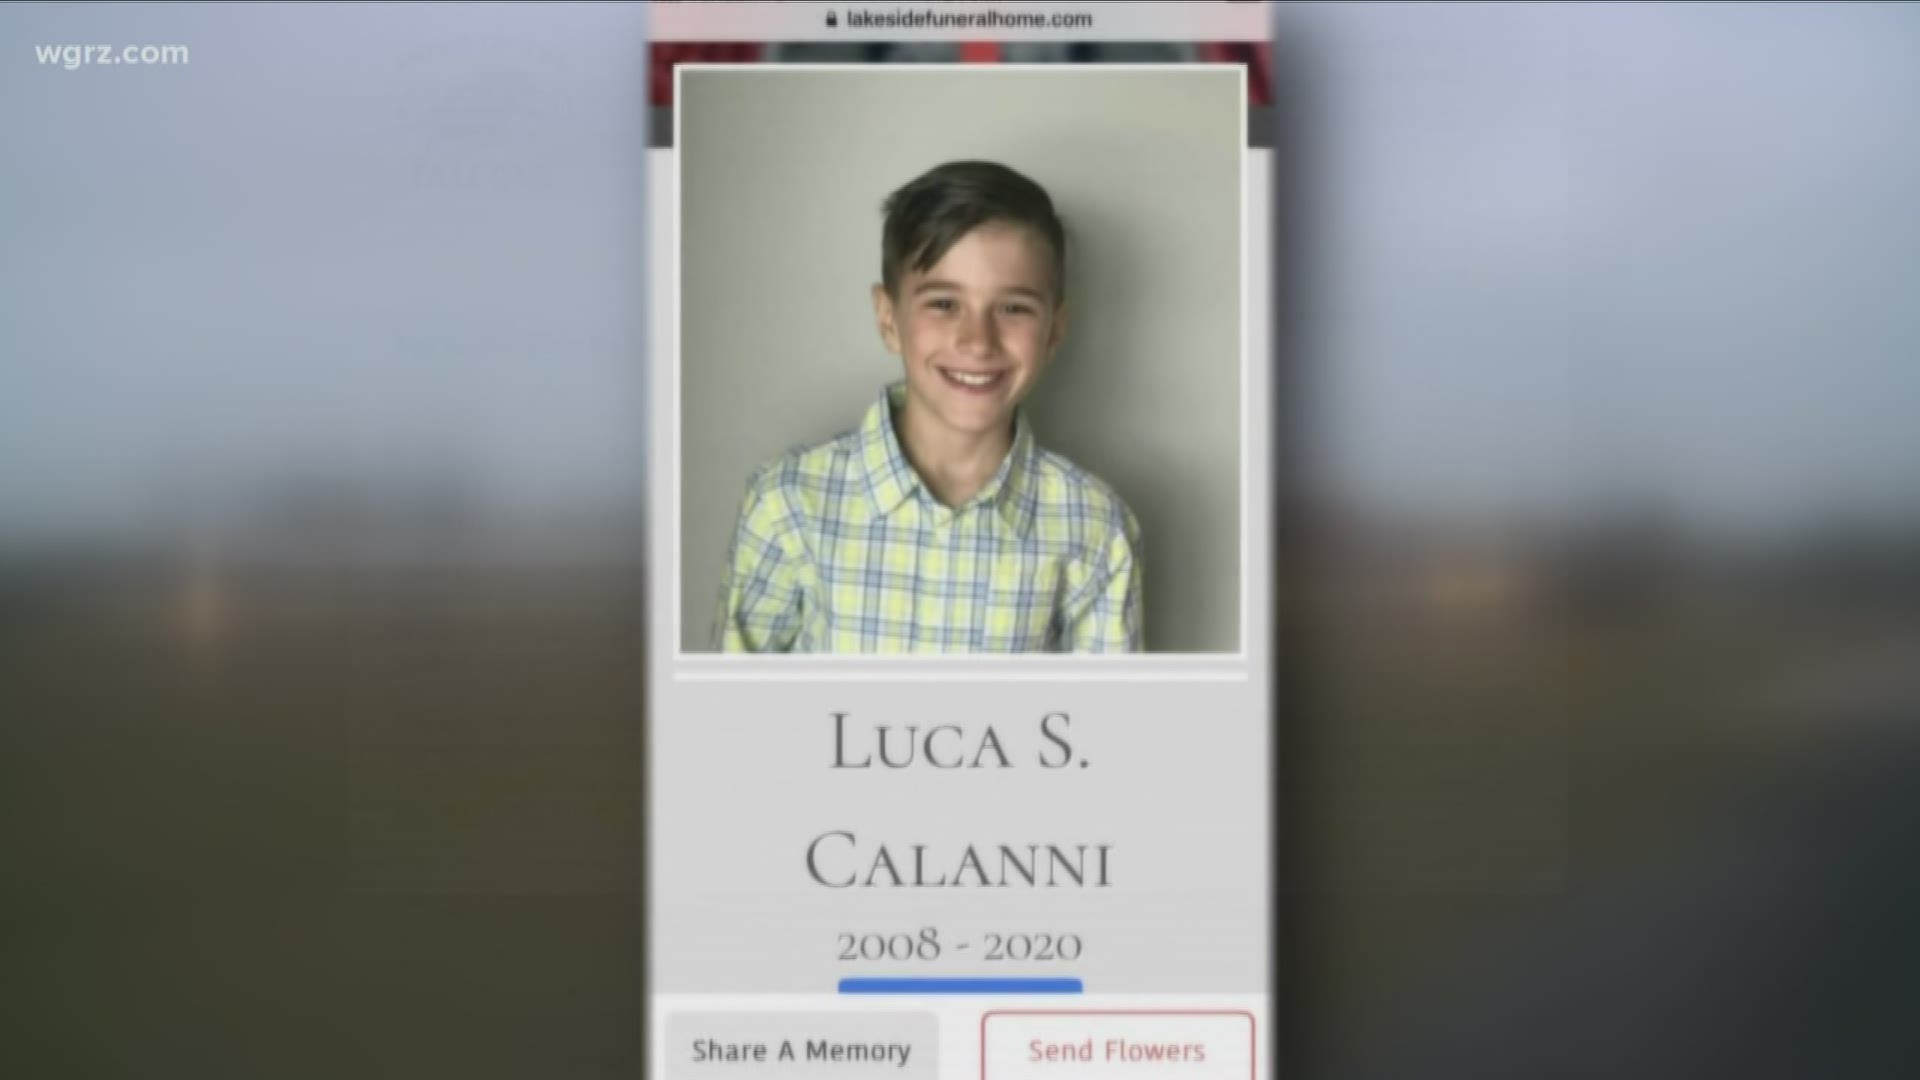 Funeral services were held this morning for Luca.
He was remembered as a boy who loved being active and his family plans to keep that legacy alive.